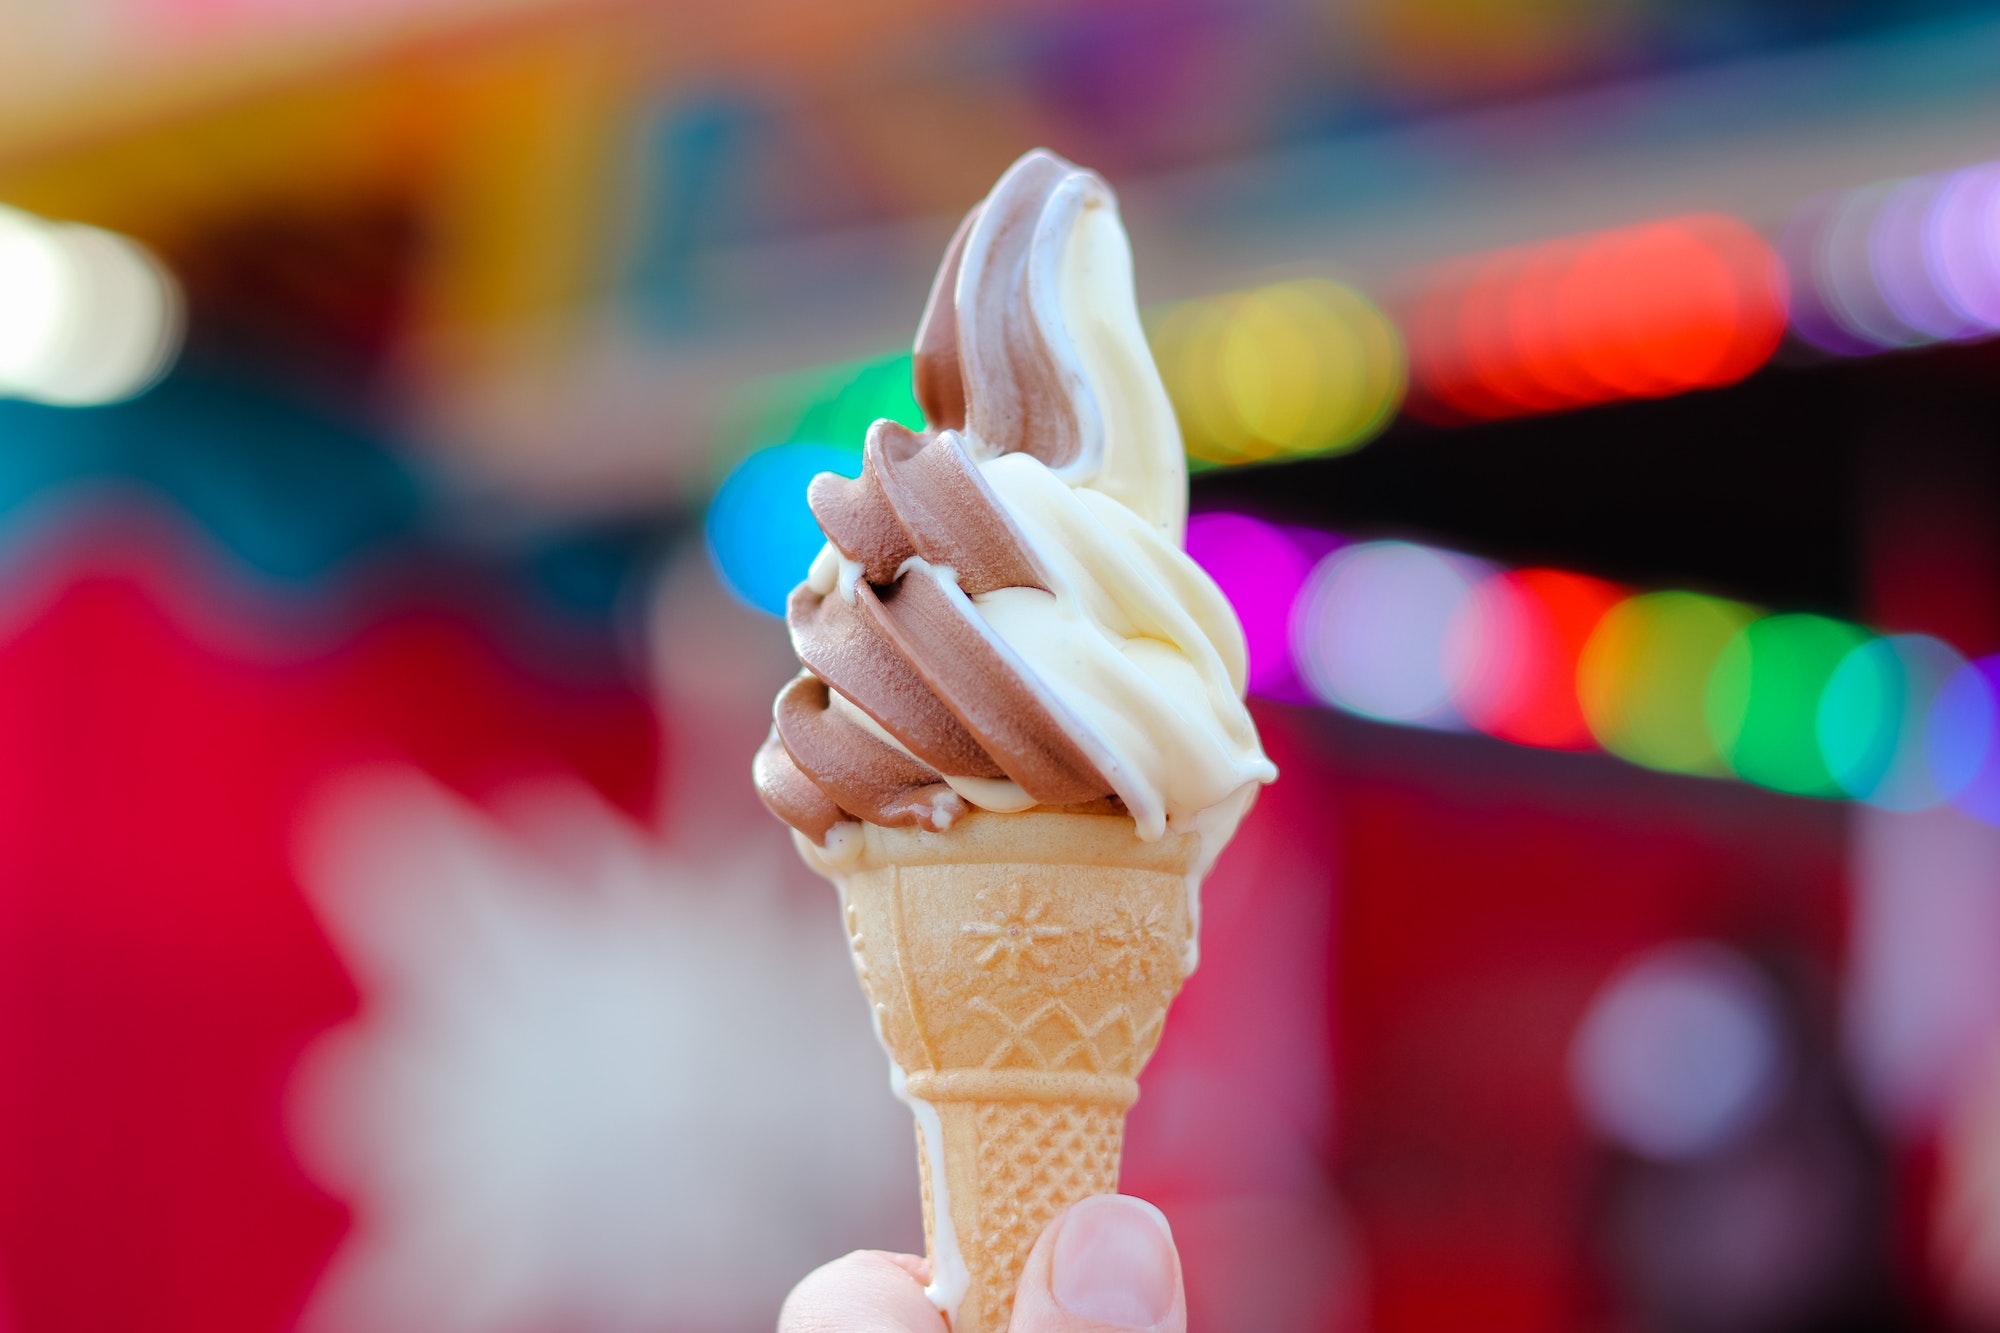 Hand holding chocolate and vanilla soft ice cream in waffle cone with blurred bright colorful